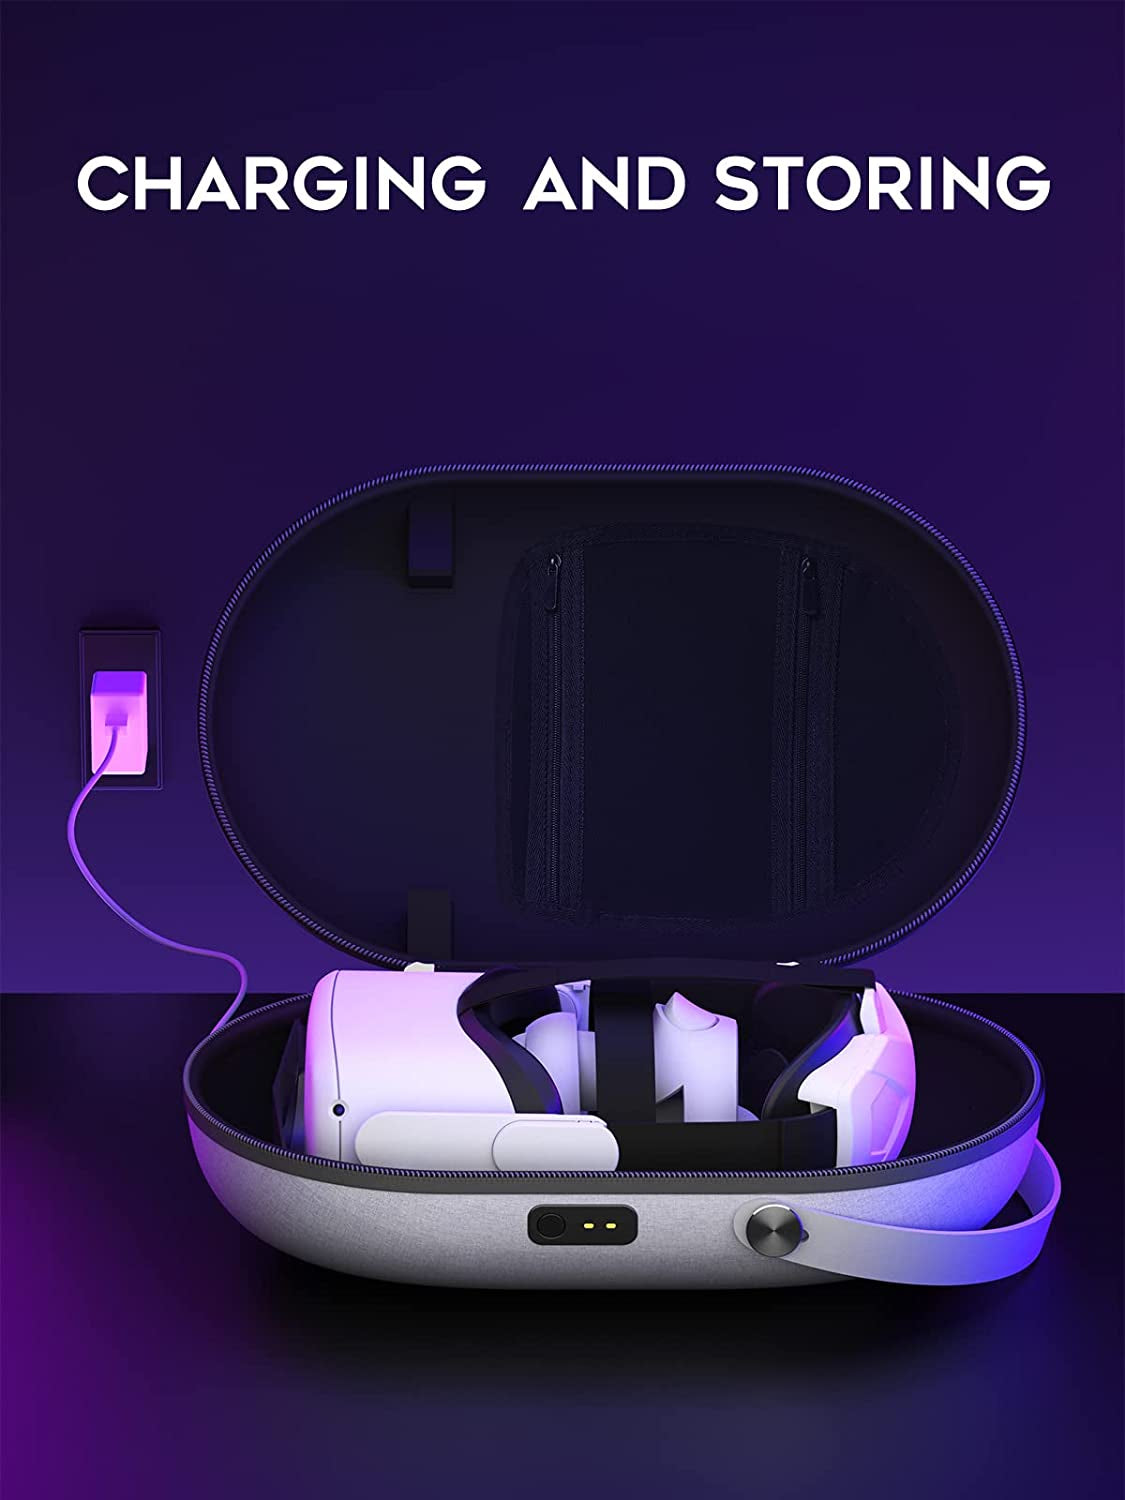 DESTEK OC1 Carrying Case with Convenient Snap Charging, Compatible with Meta/Oculus Quest 2 & Elite Strap with Battery, Storage and Fast Charge in One Place - Fabric Version